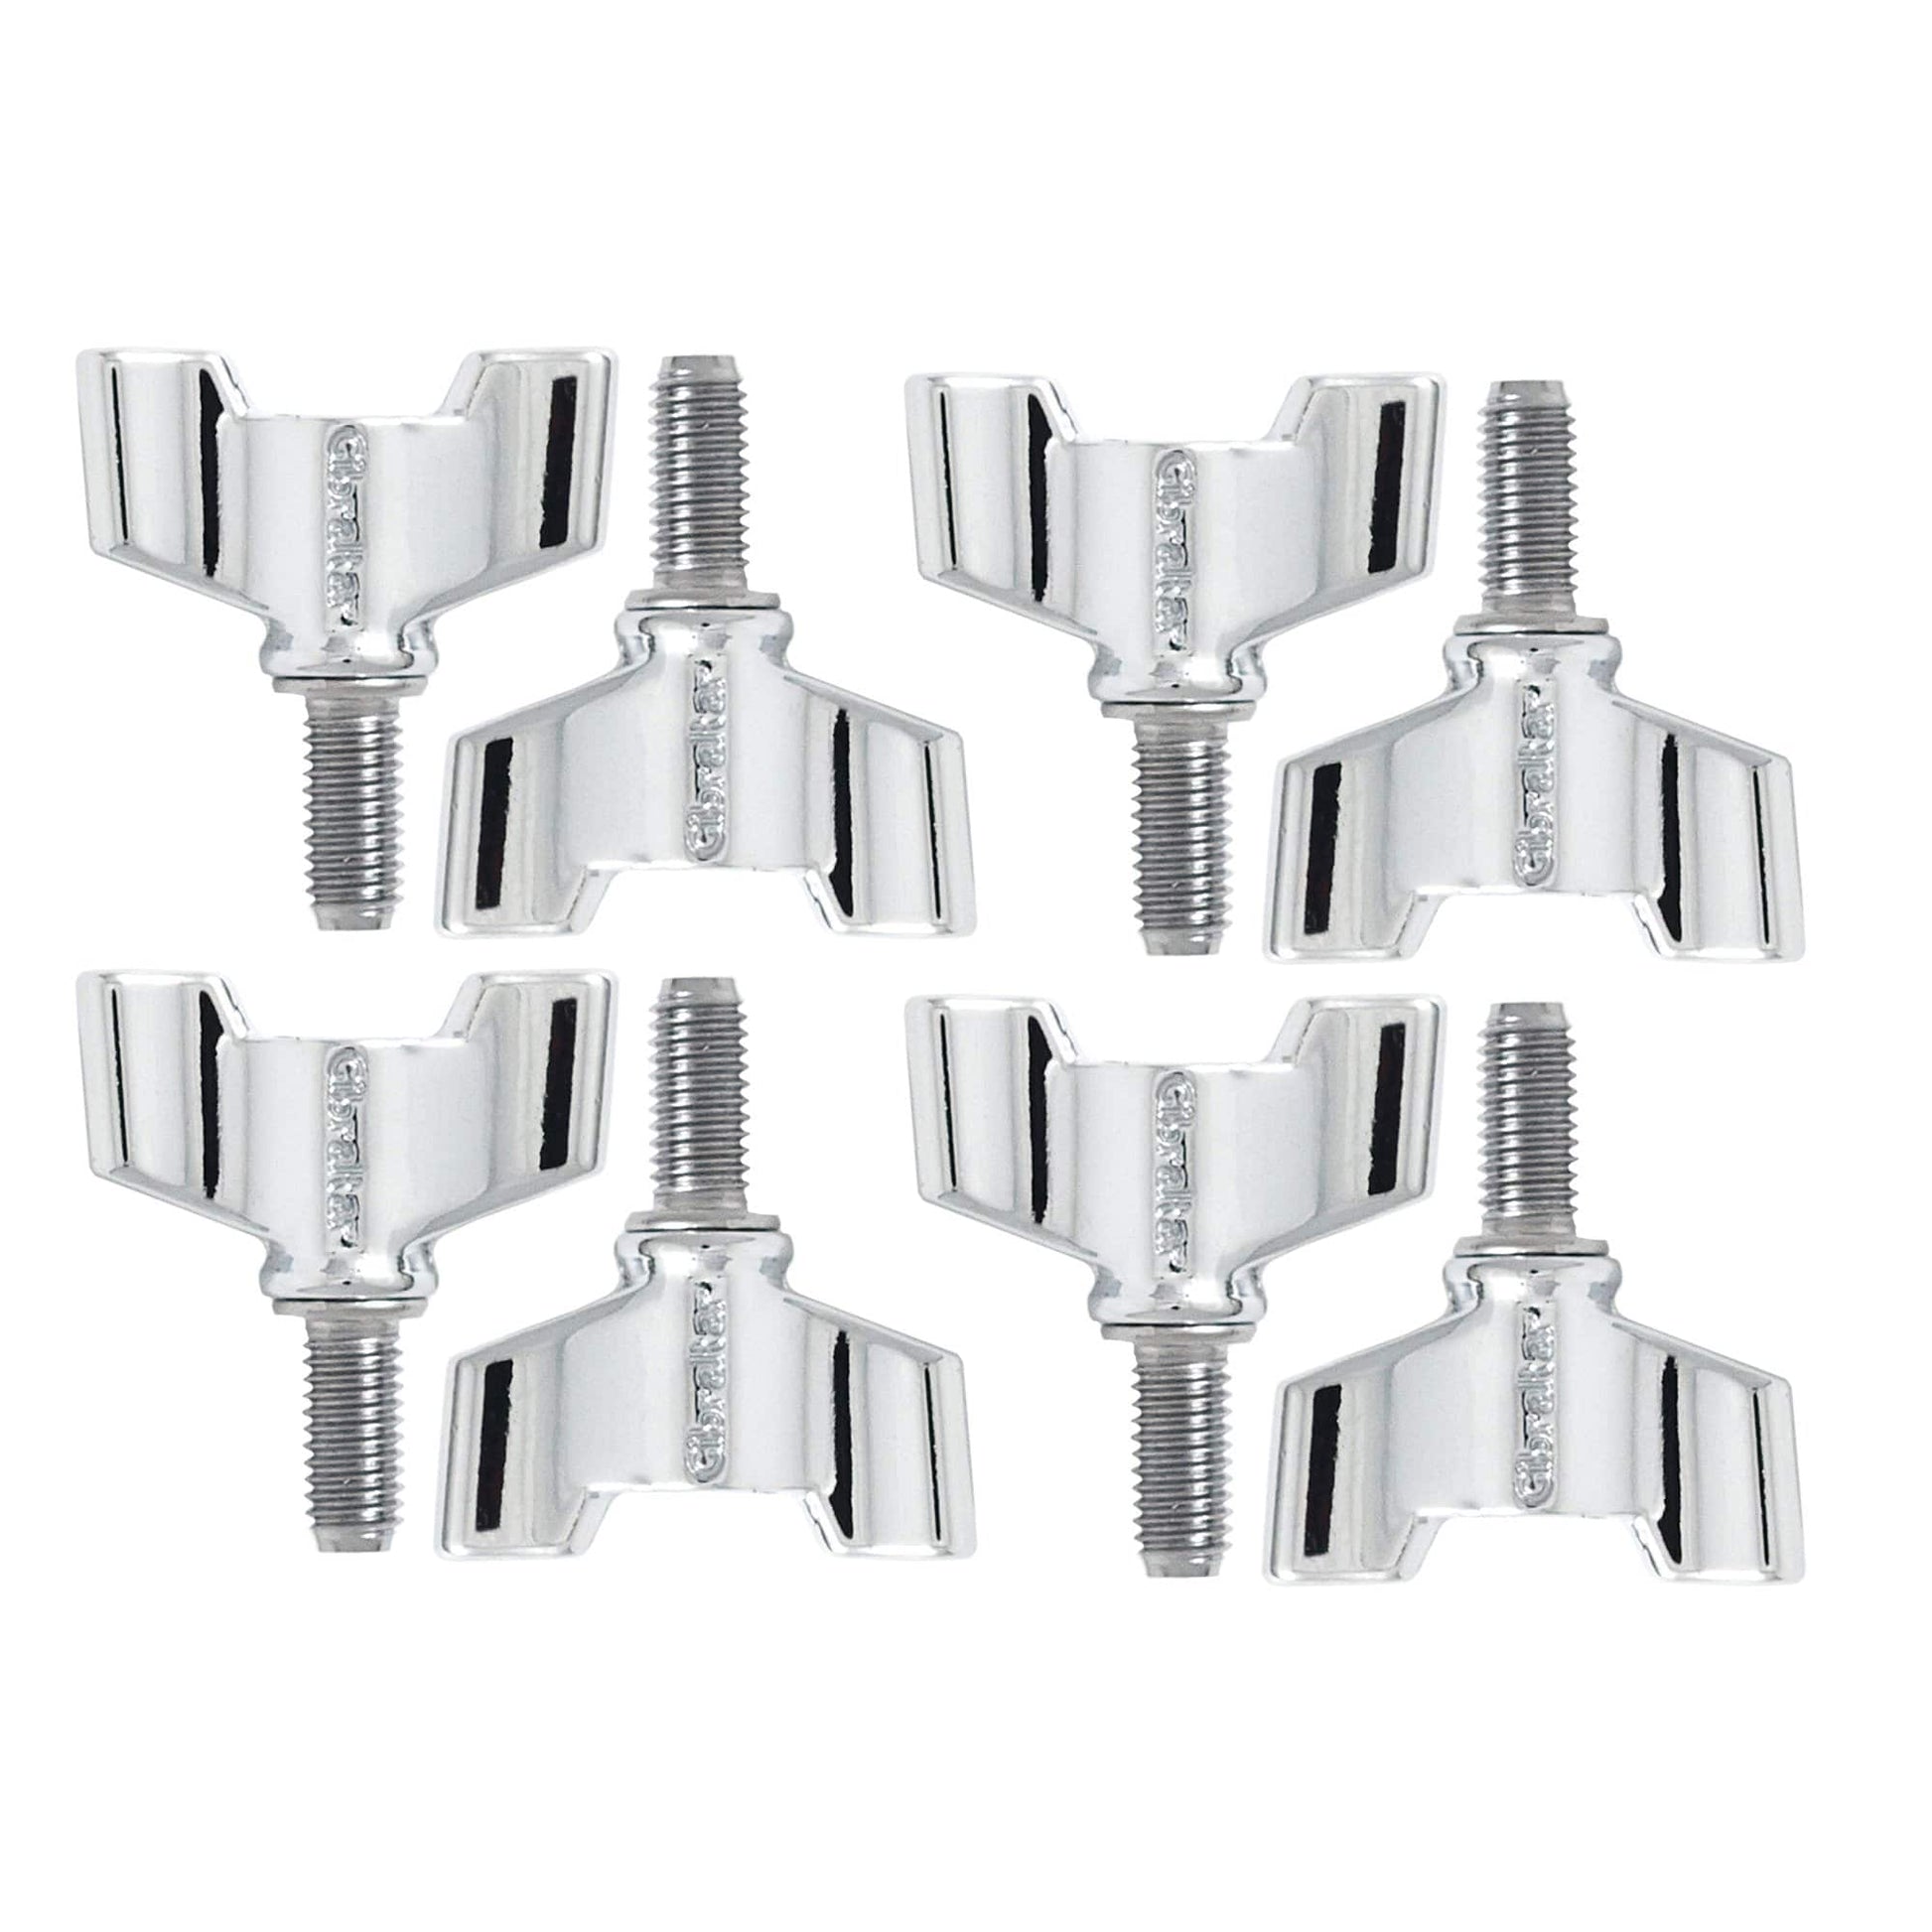 Gibraltar 8mm Wing Screw (8 Pack Bundle) Drums and Percussion / Parts and Accessories / Drum Parts